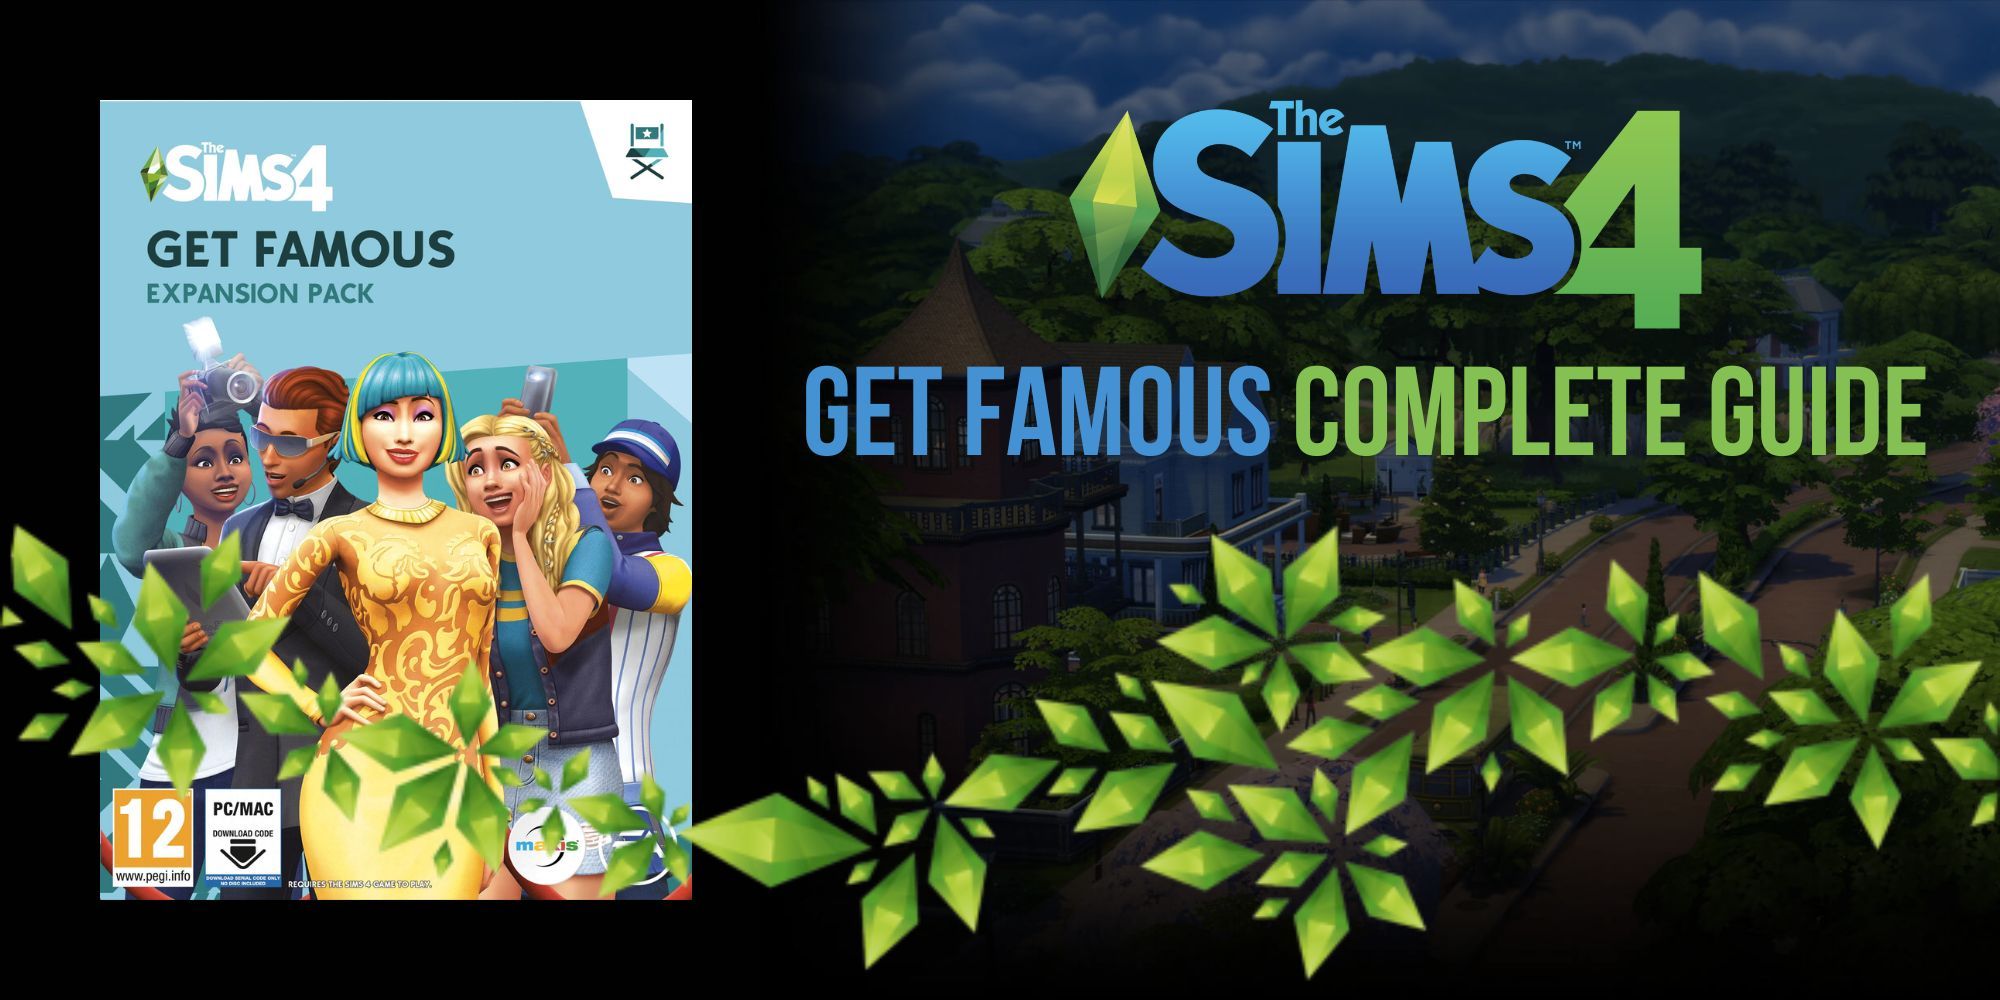 The Sims 4 Get Famous Complete Guide